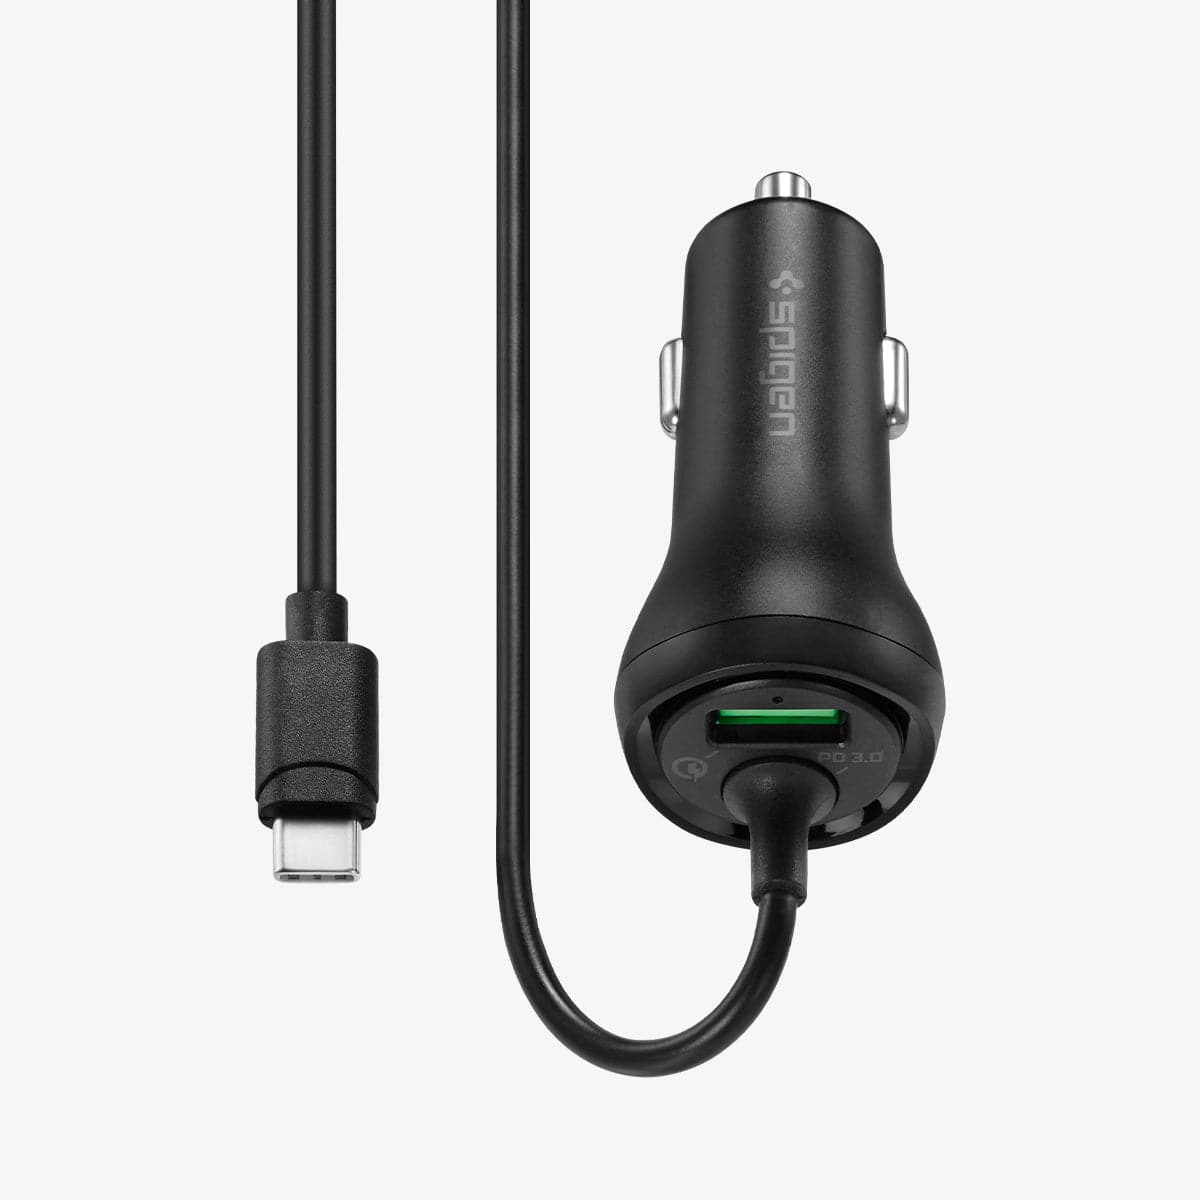 000CP25596 - SteadiBoost™ Built-in USB-C PD3.0 Car Charger showing the front and usb-c cable